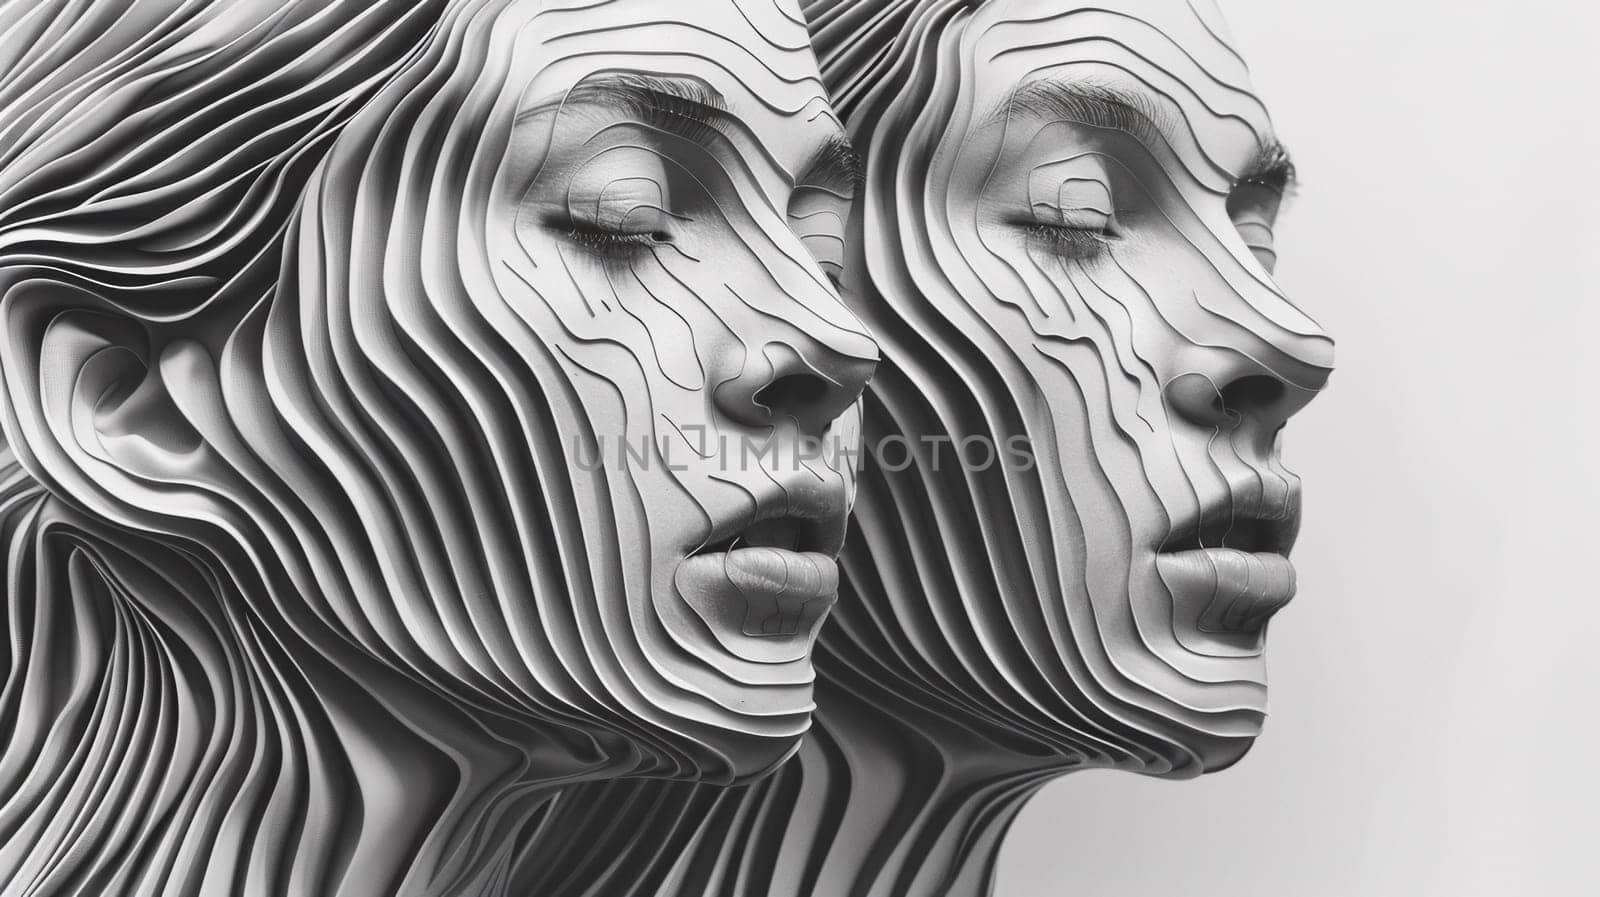 Two women's faces are made out of wavy lines